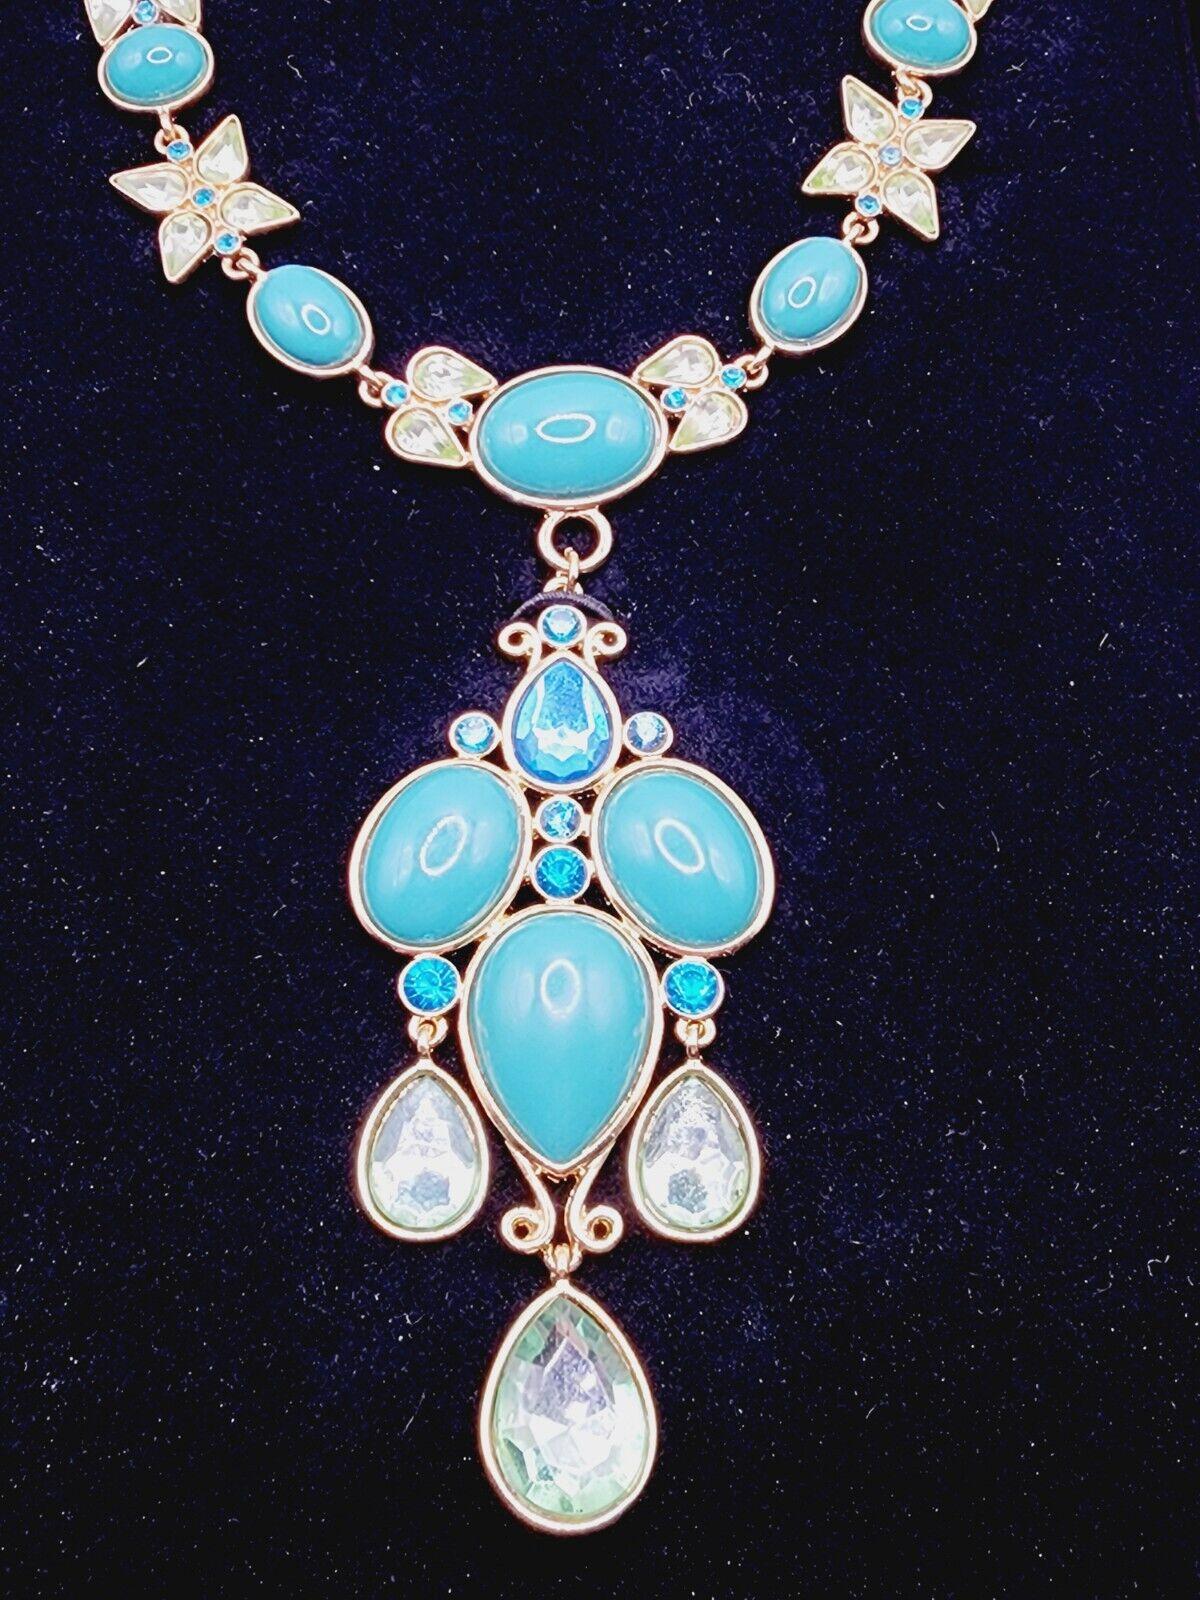 Simply Beautiful! Vintage Designer Signed SCAASI Turquoise and Crystal Gold tone Festoon Runway Necklace. Hand set with Faux Turquoise and Crystal Stones. Necklace measures approx. 18